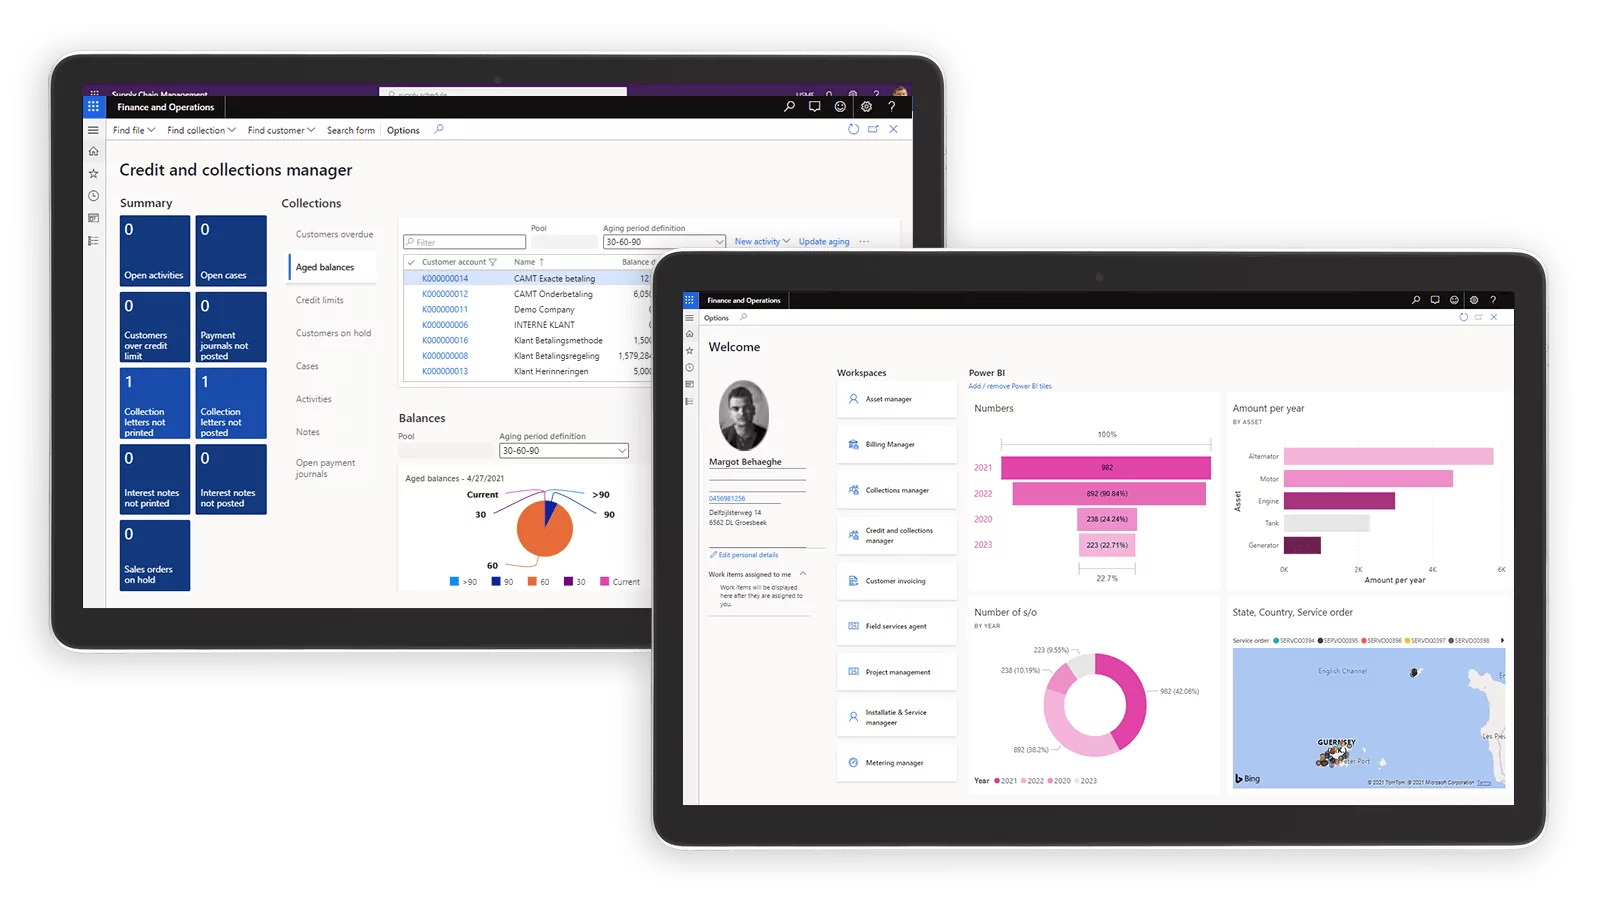 UMAX - CRM and ERP Solution for Utilities built on Microsoft Dynamics 365